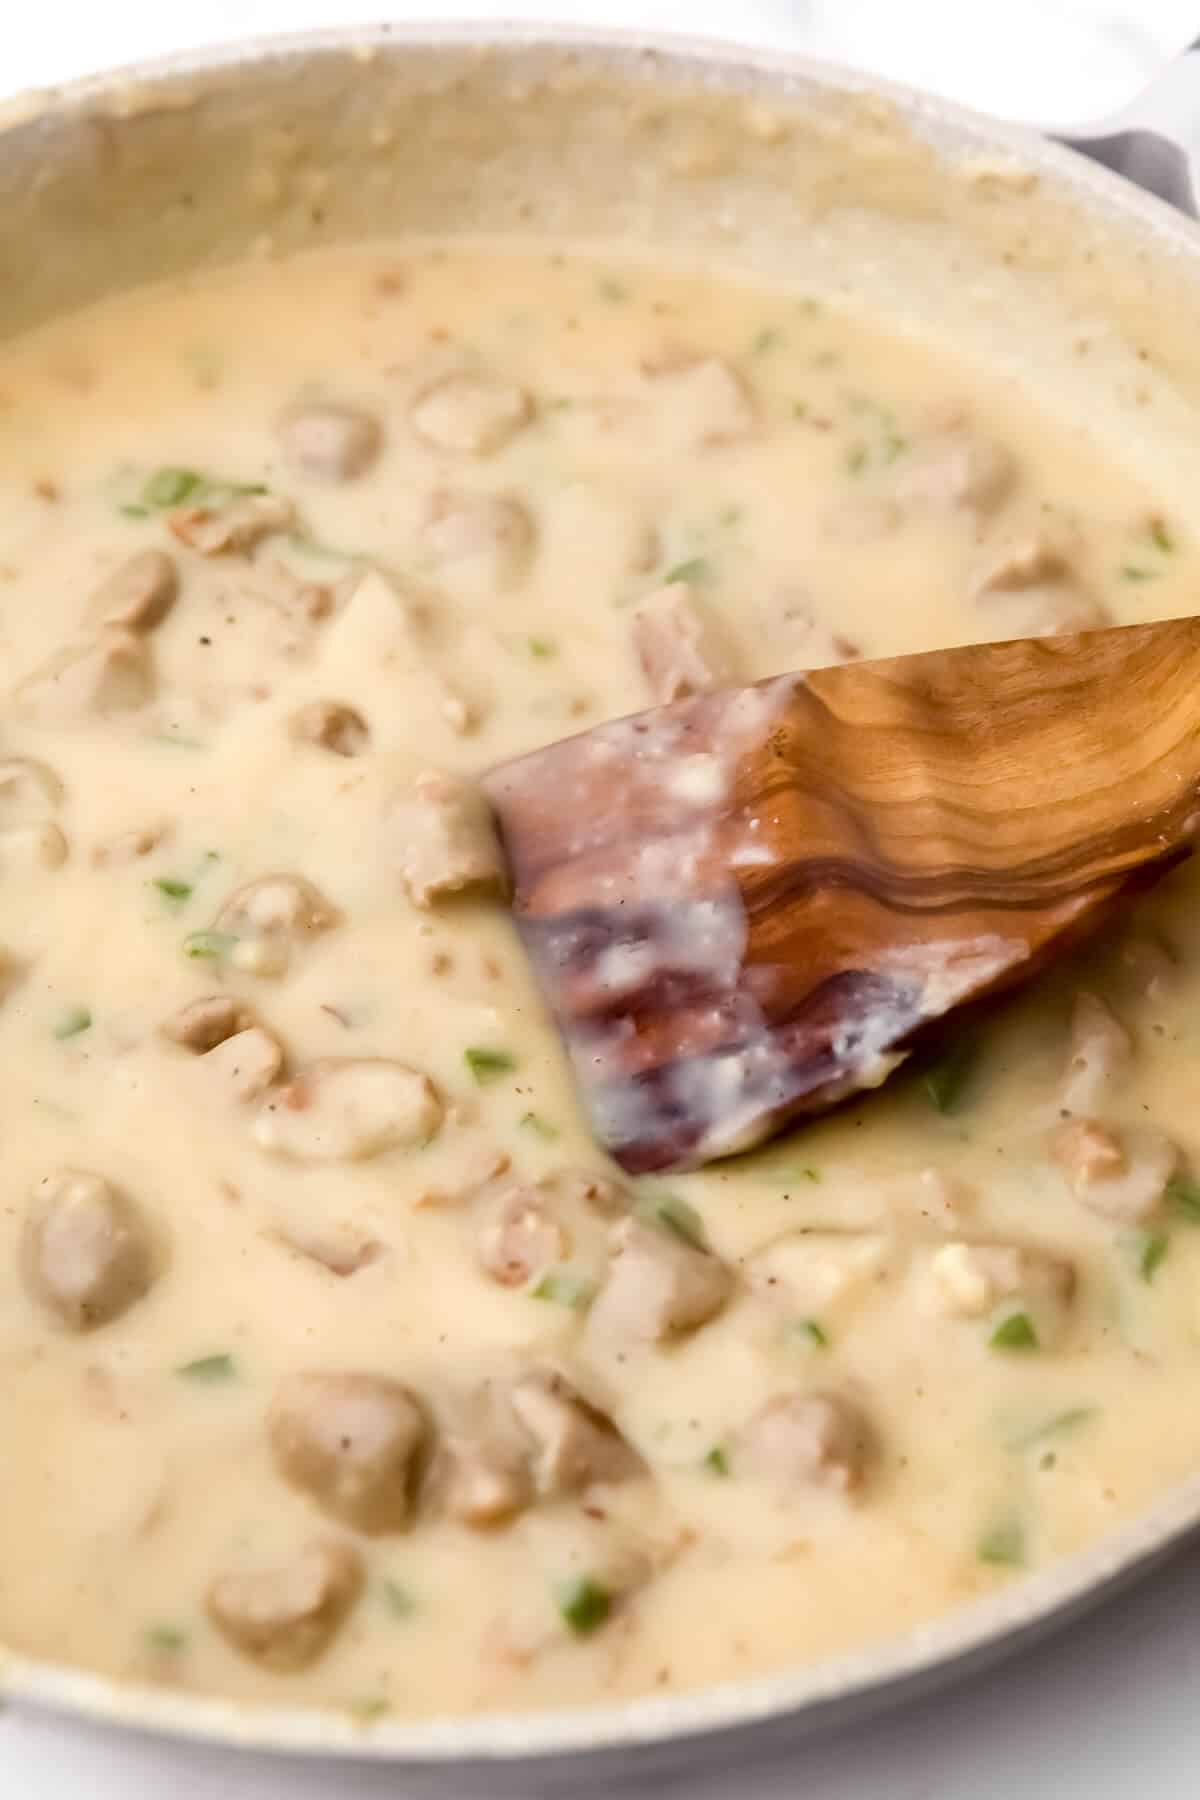 Vegan sausage gravy in a skillet after it has been thickened.